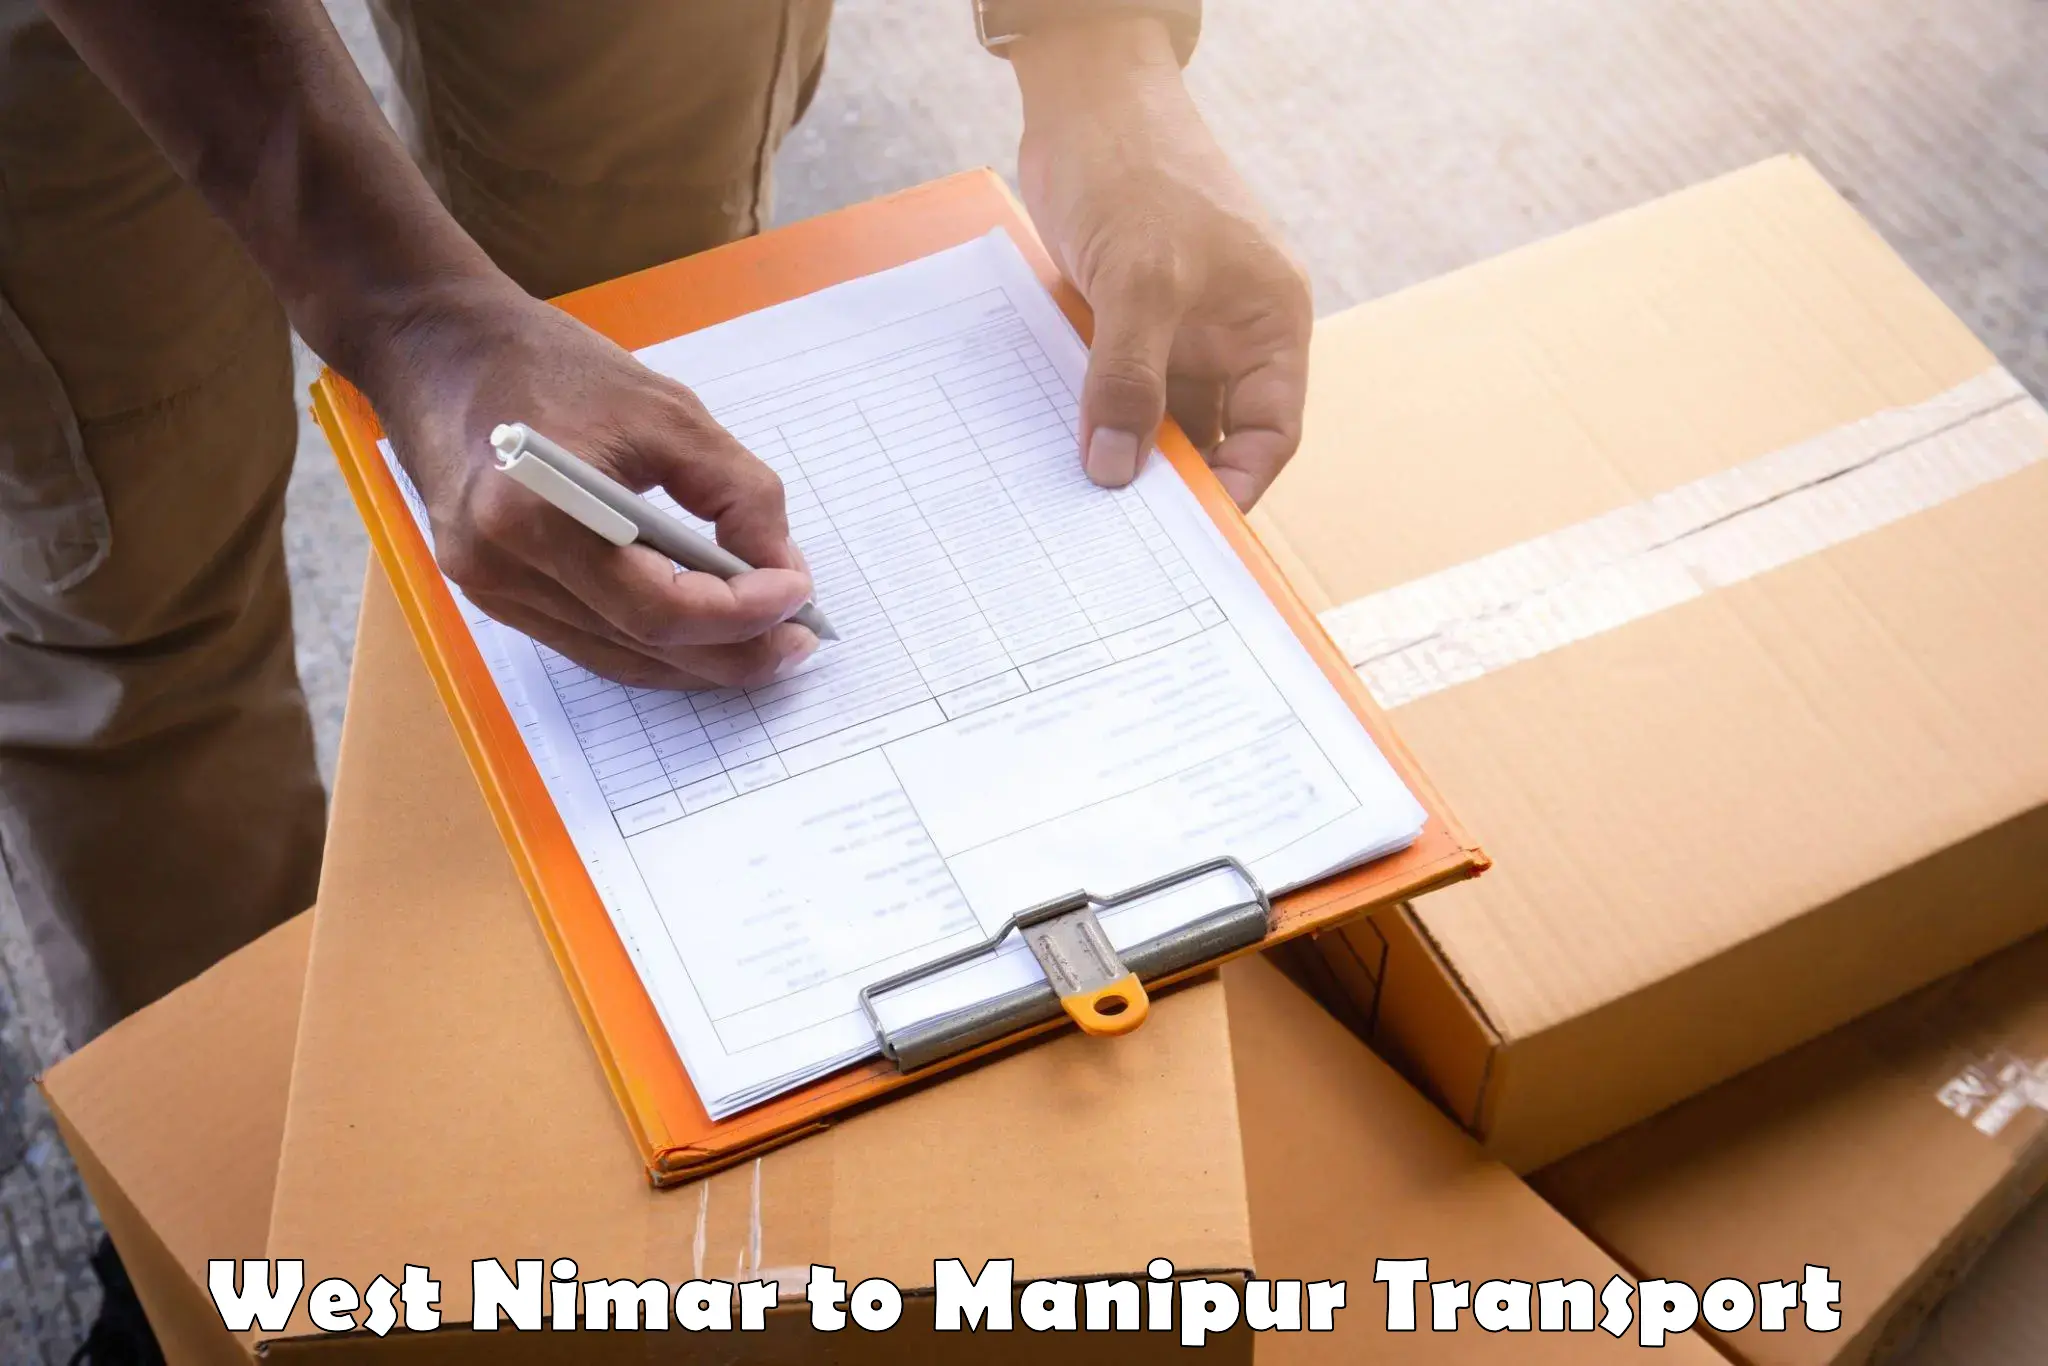 Lorry transport service West Nimar to Manipur